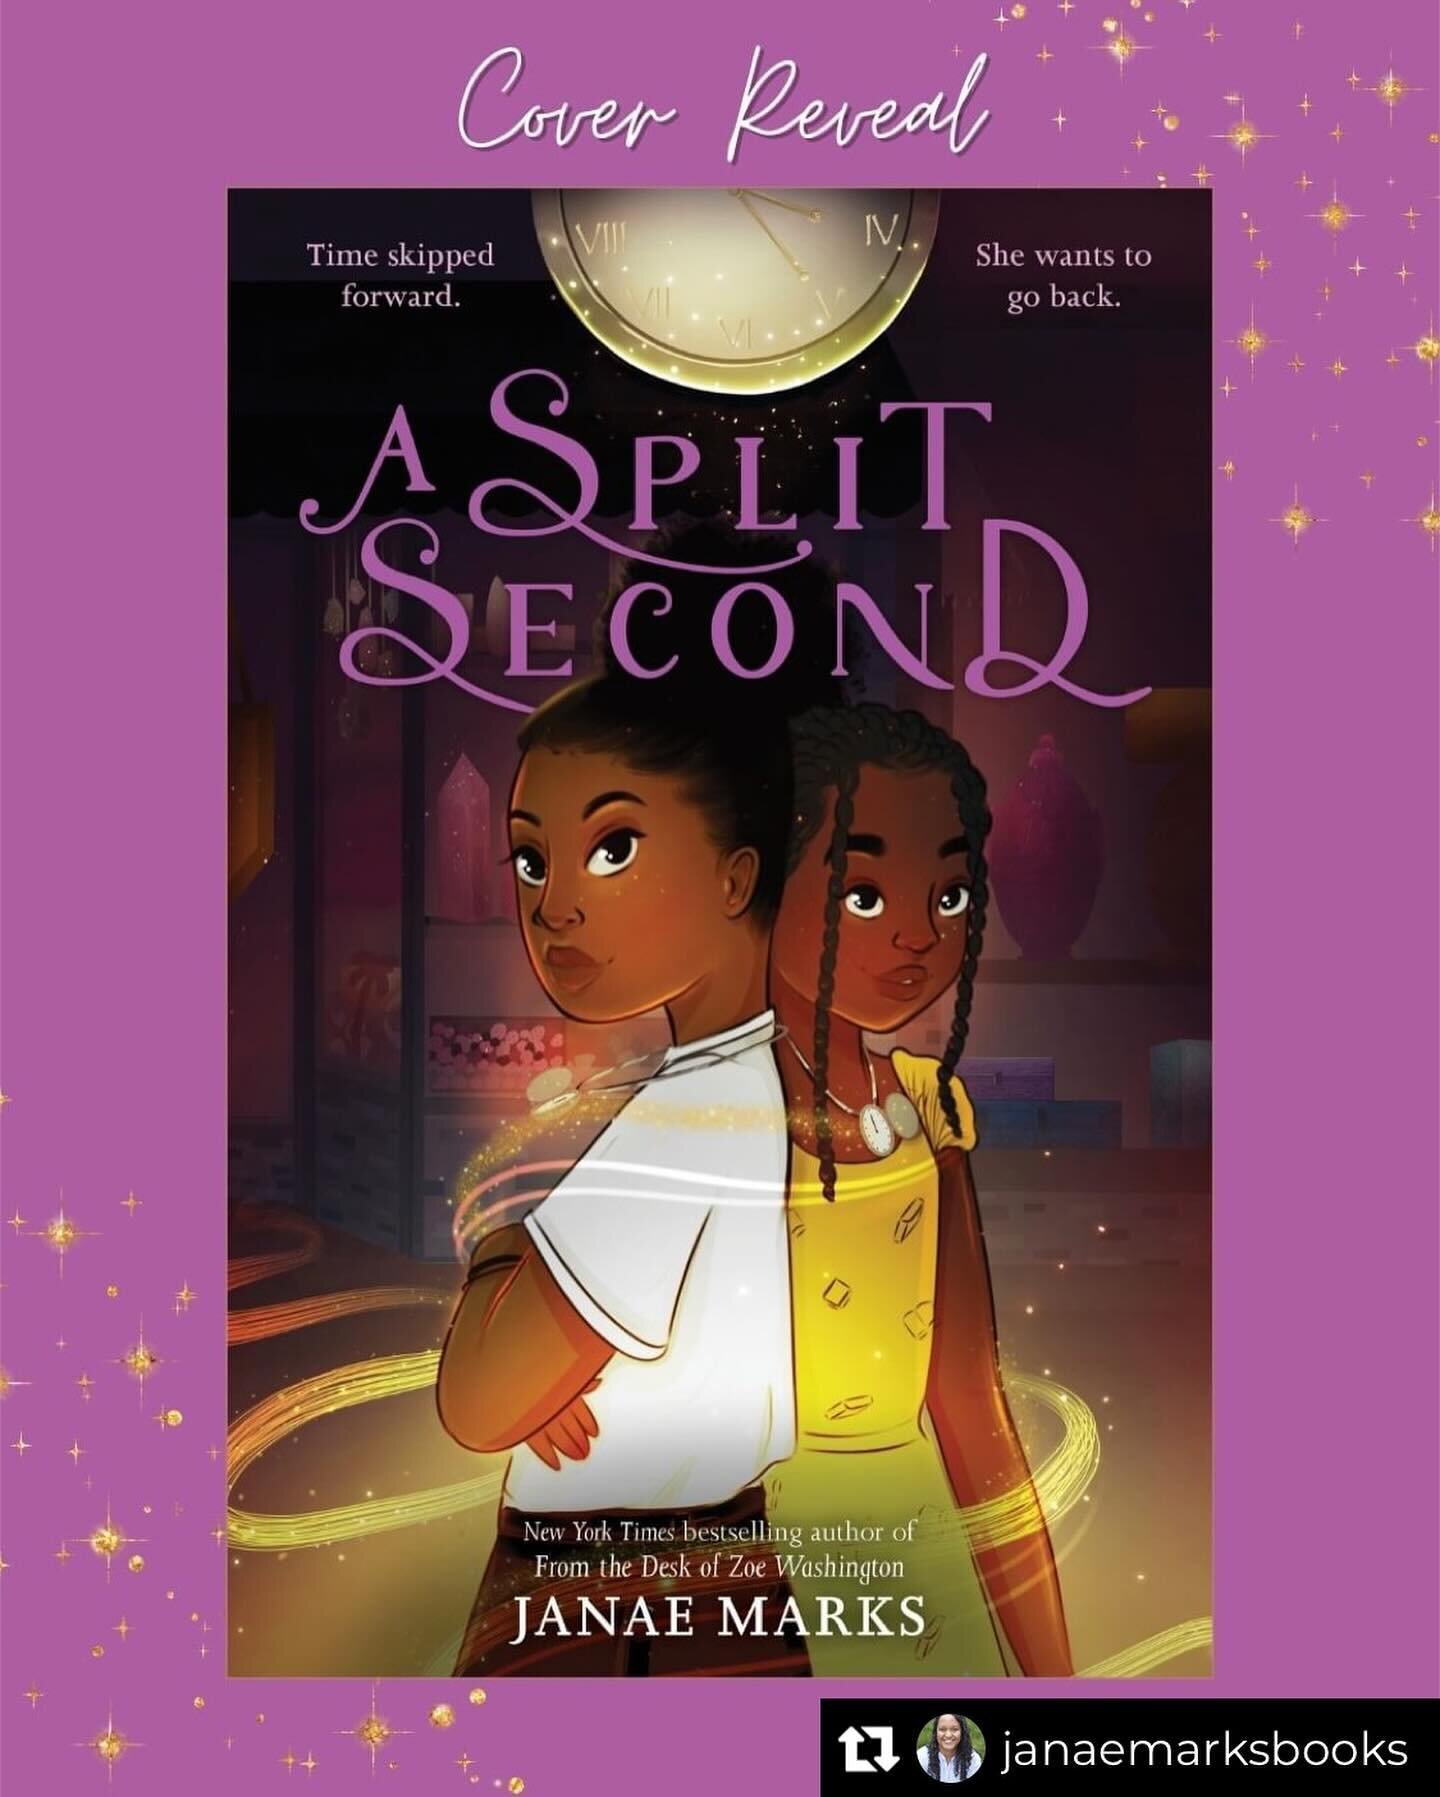 !!! 👀!!!

#repost from @janaemarksbooks

It's #WorldReadAloudDay, so to make it even more exciting, I'm doing a ✨COVER REVEAL!✨

I'm thrilled to share the cover for my upcoming middle grade novel, A SPLIT SECOND! It was illustrated by @audrey_sakho 